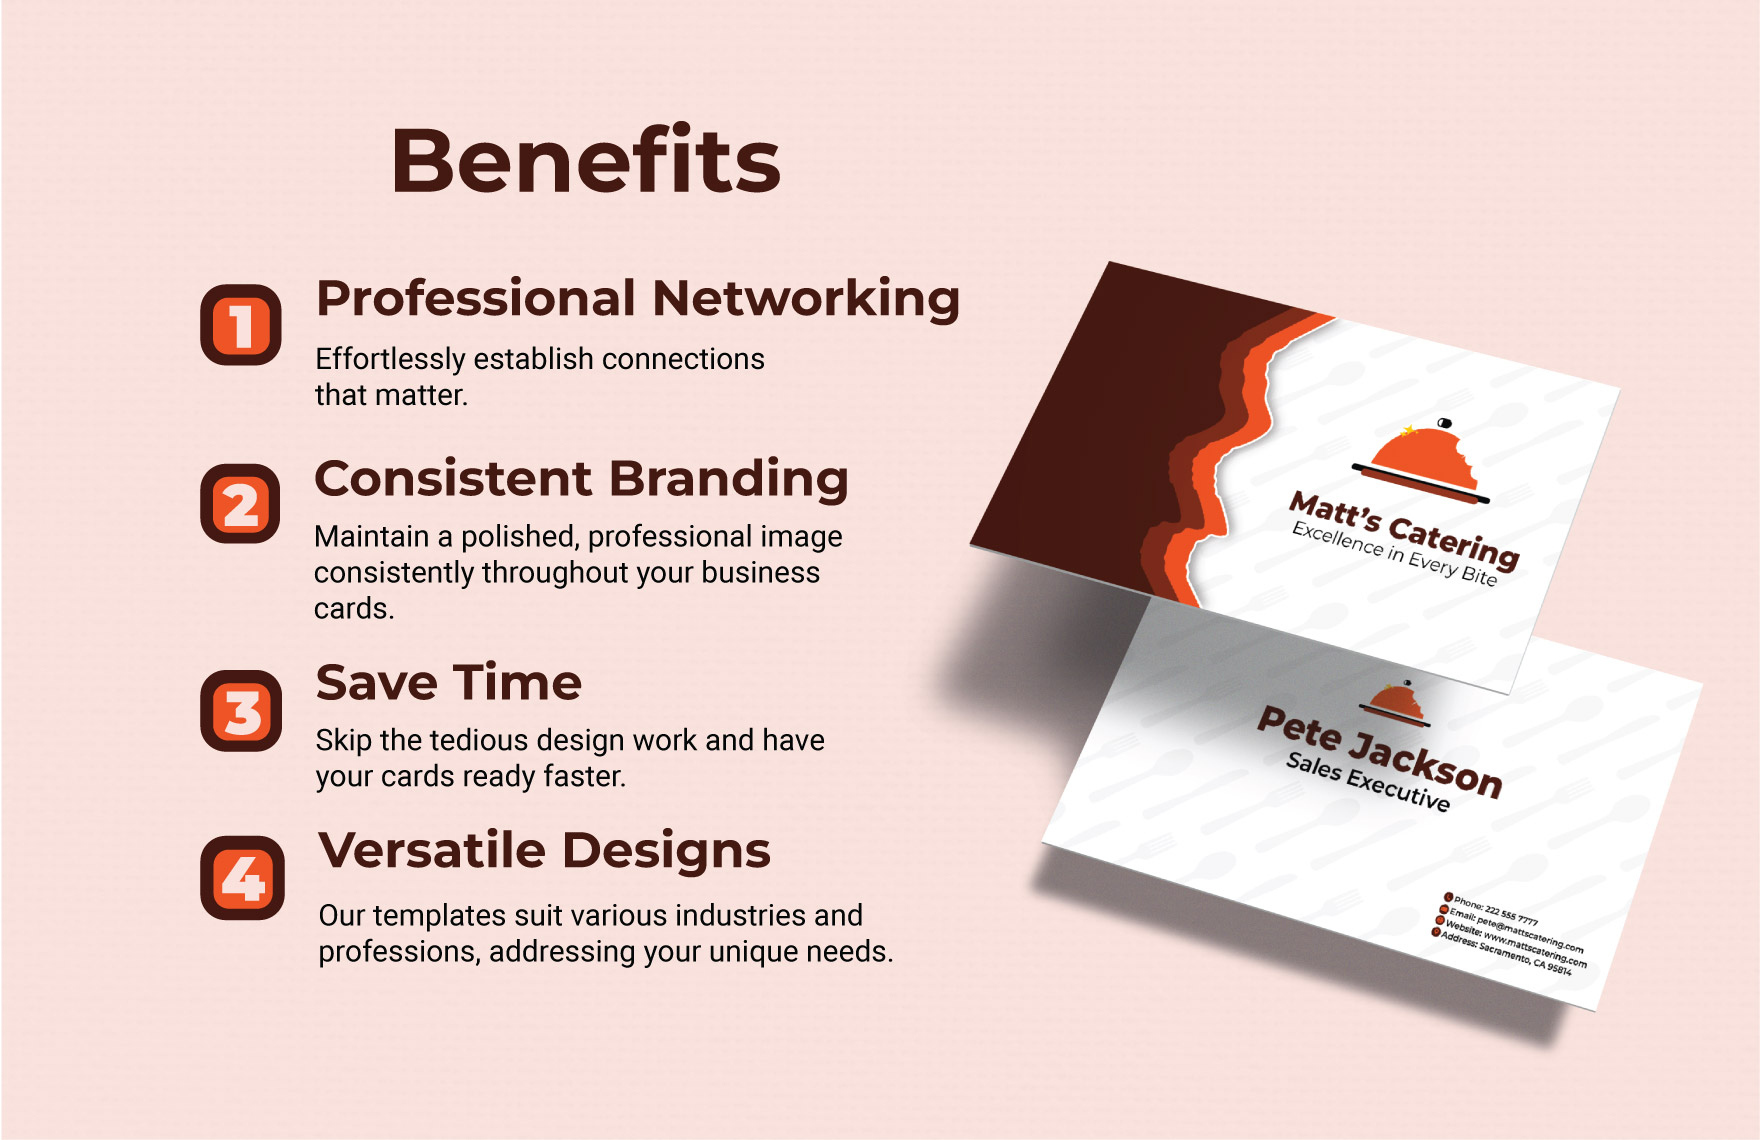 Catering Business Card Template